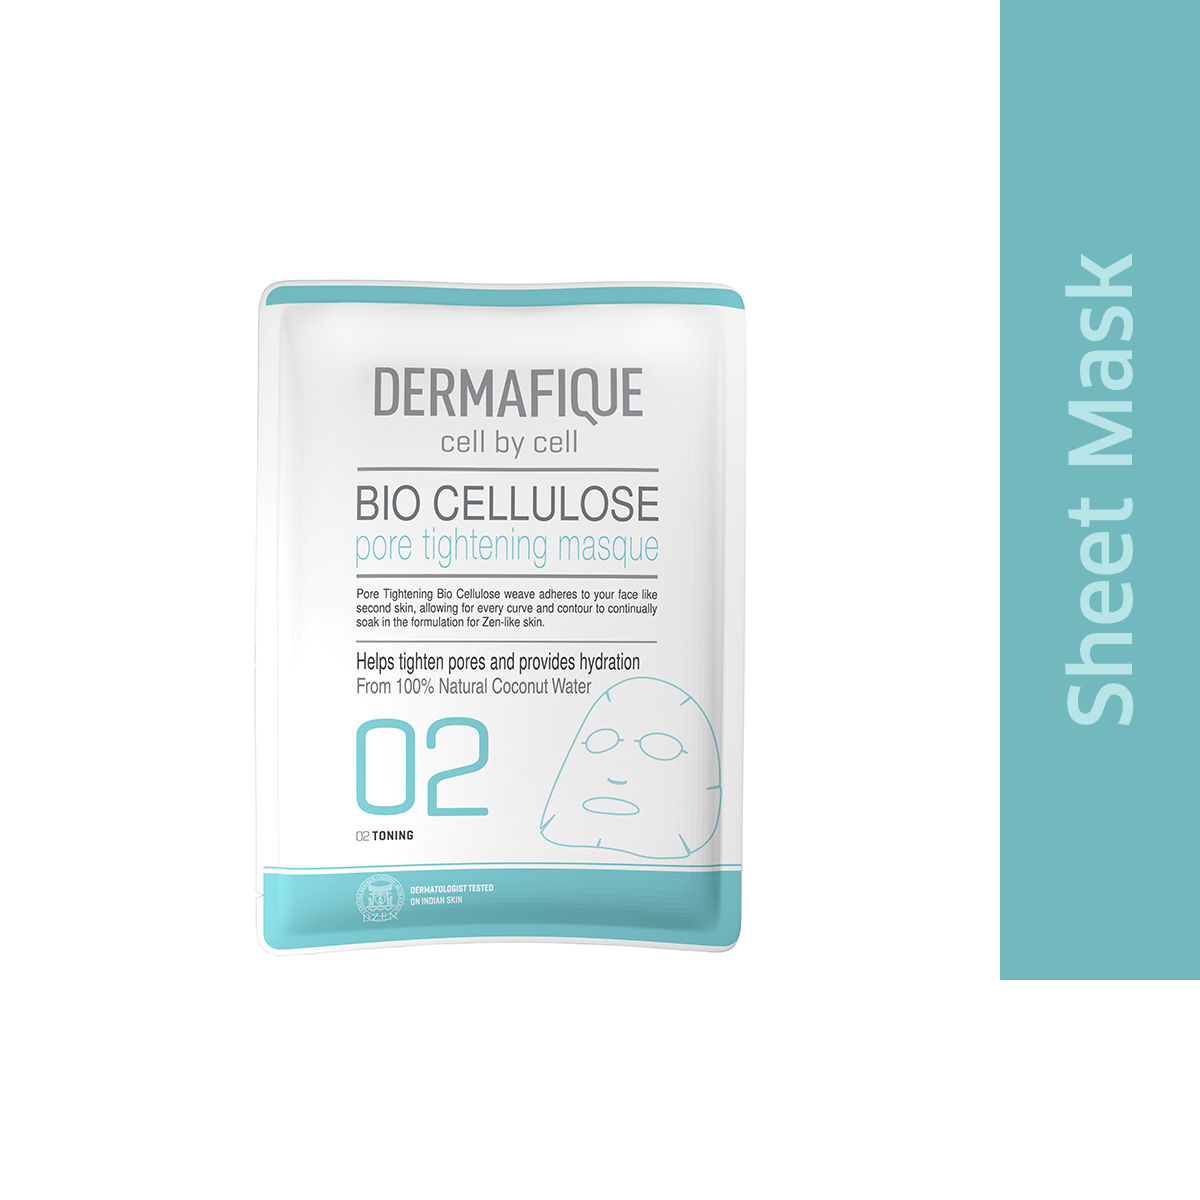 Dermafique Bio Cellulose Pore Tightening Face Serum Sheet Mask with Hyaluronic acid, Plant extracts